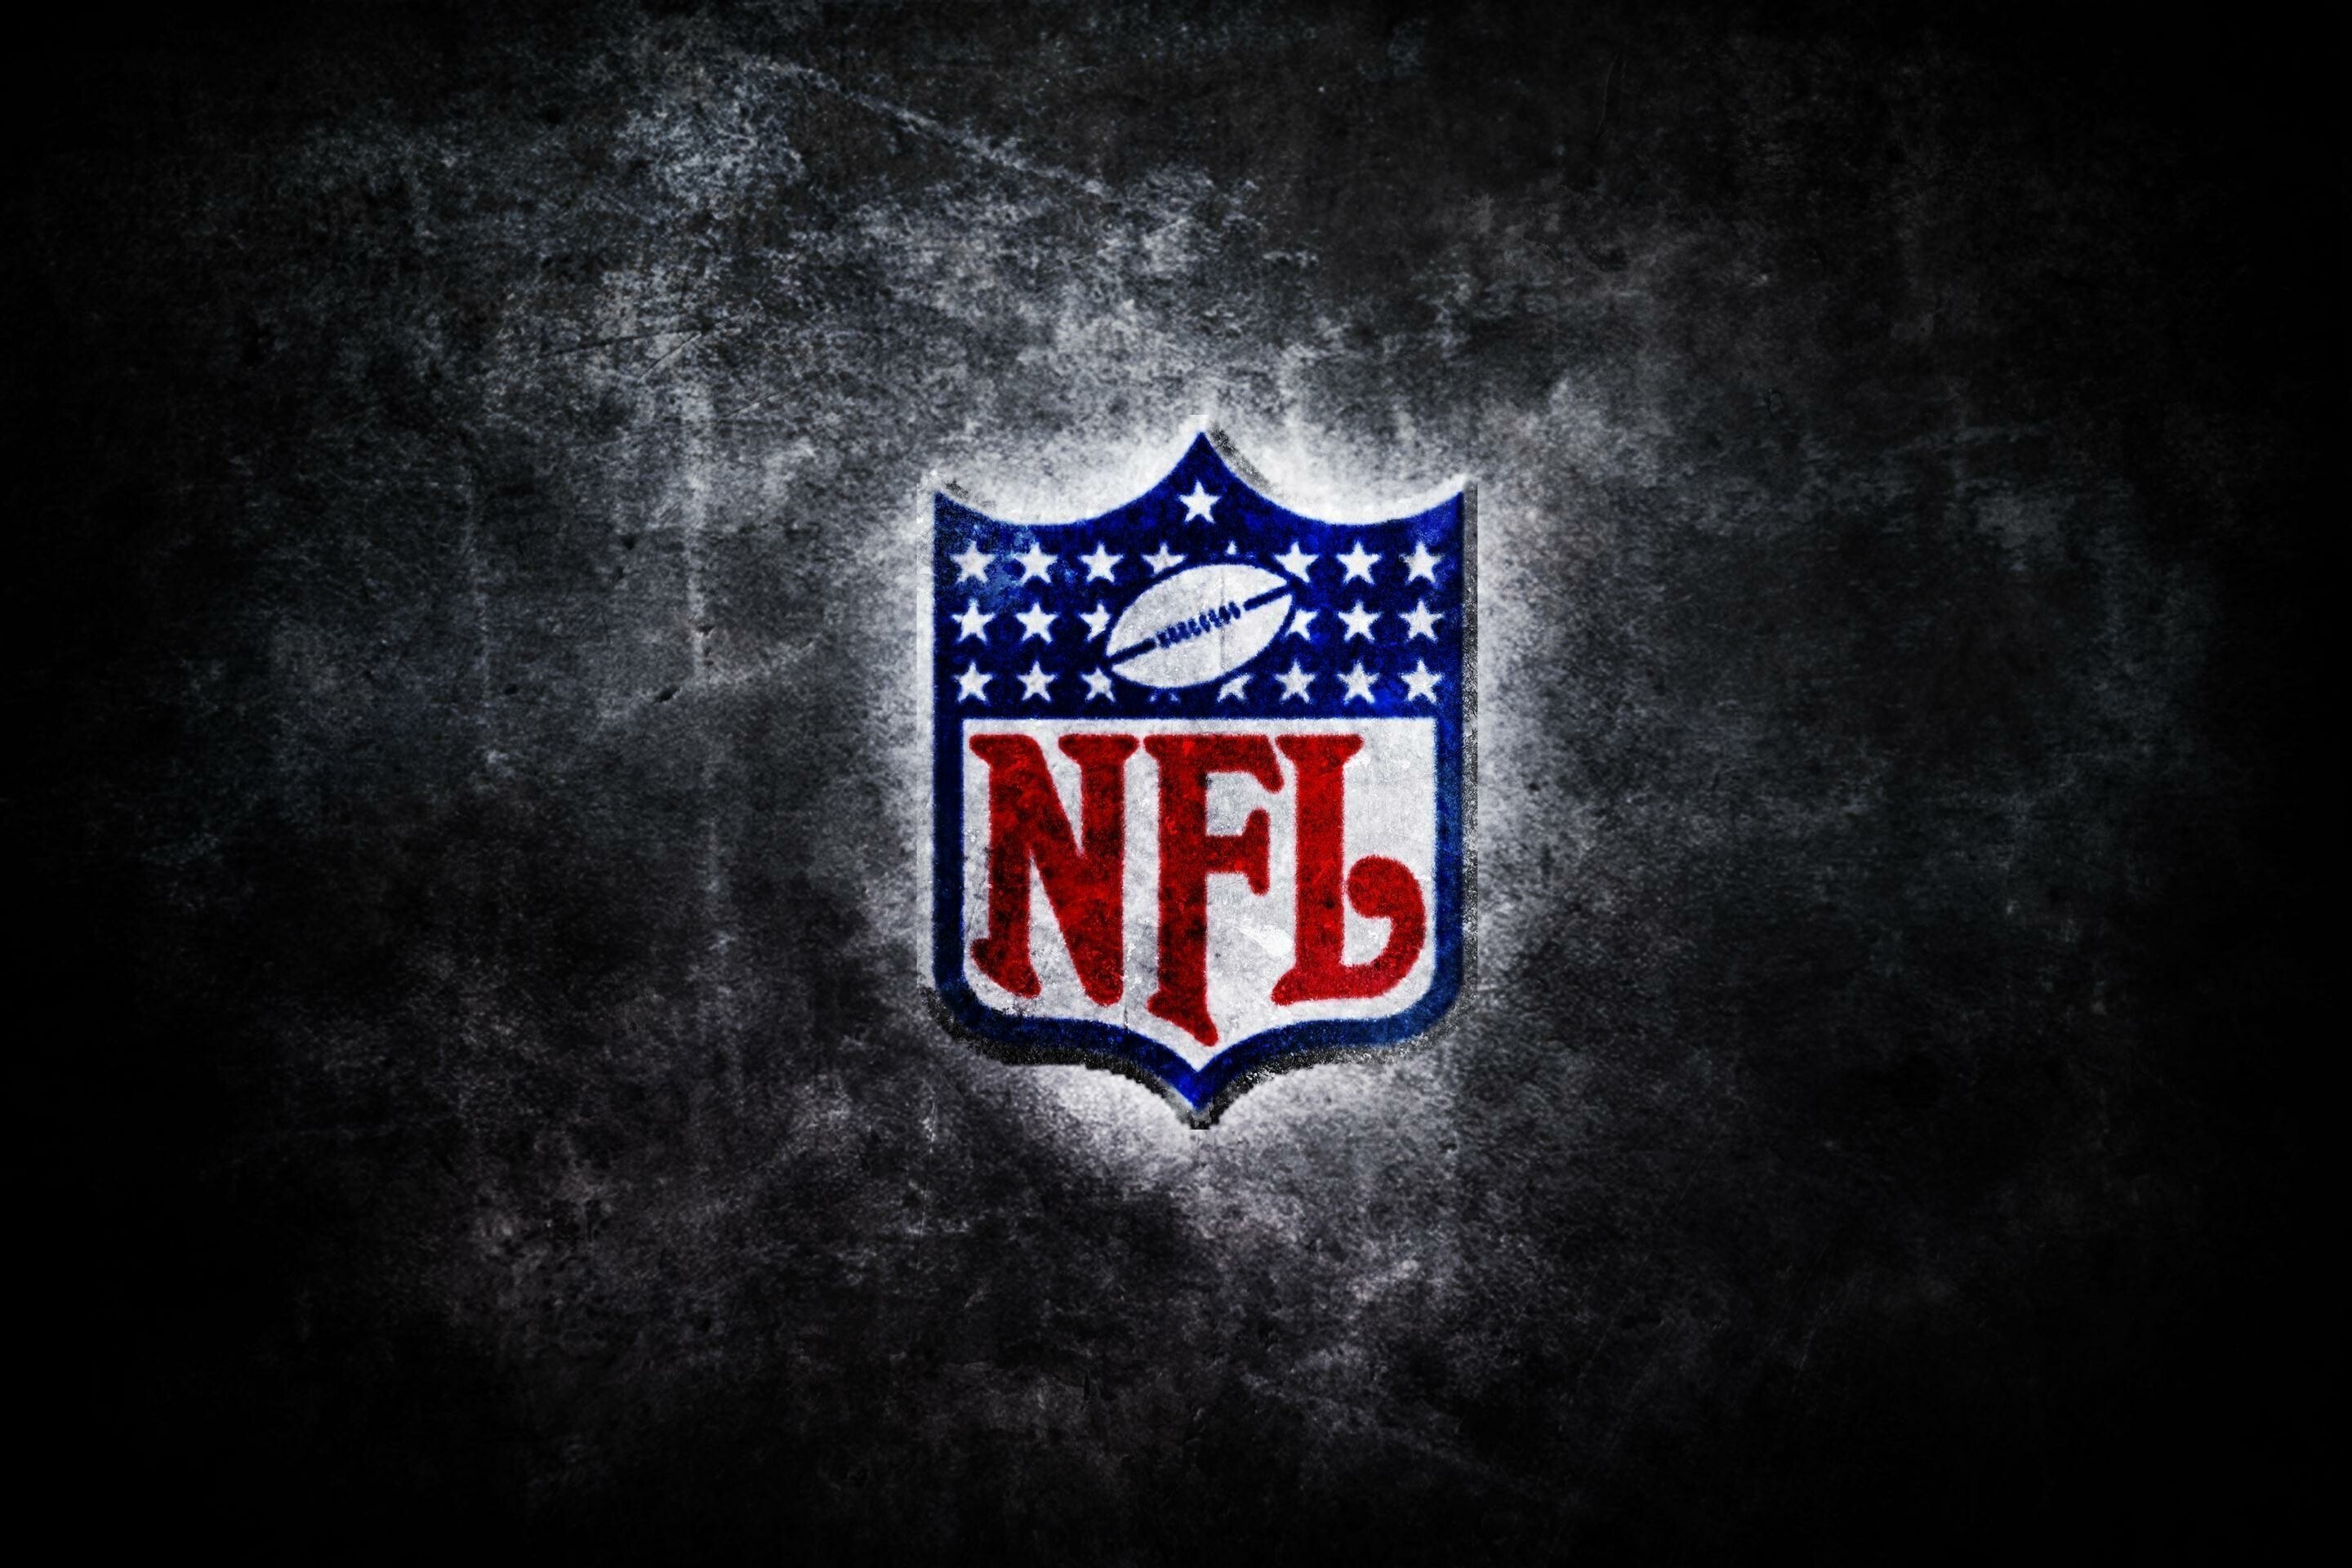 HD NFL wallpapers, Stunning visuals, Game day energy, Mobile screen masterpieces, 2880x1920 HD Desktop